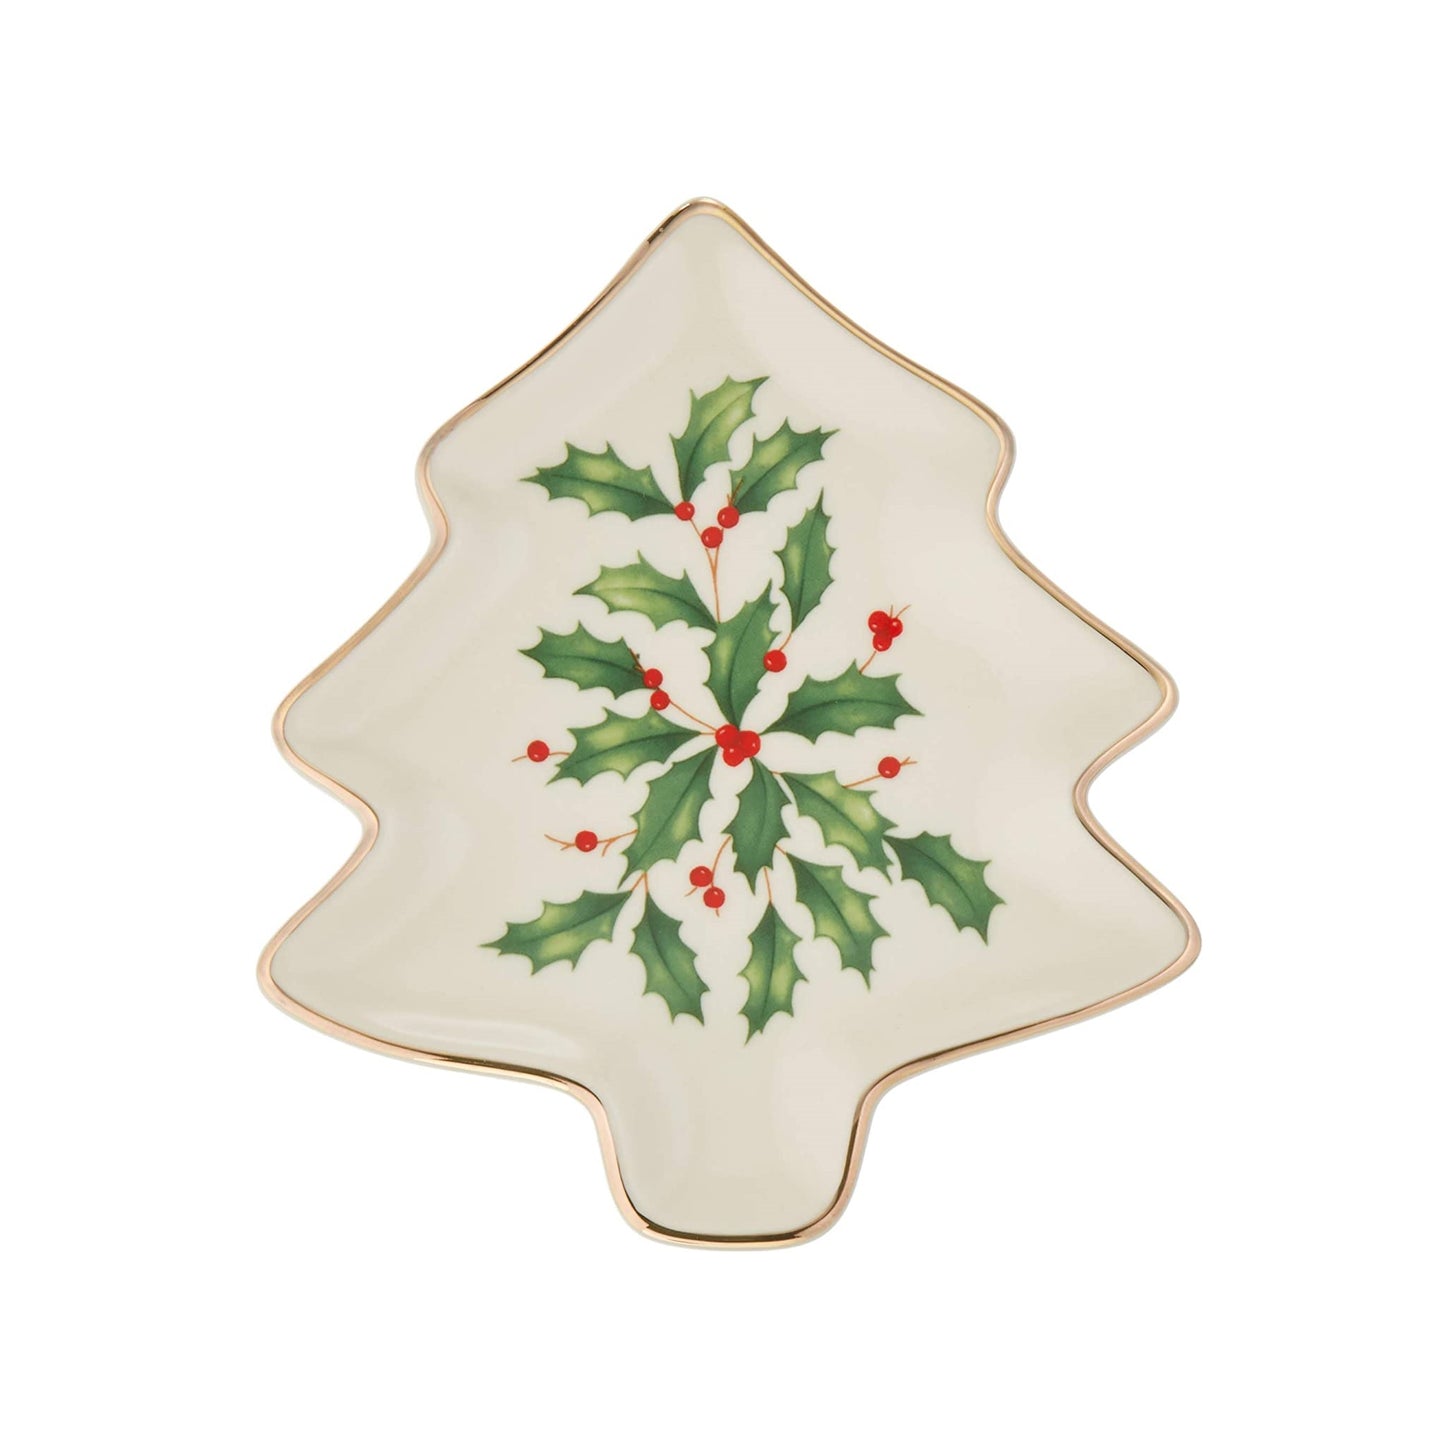 Hosting The Holidays Tree Party Plate by Lenox